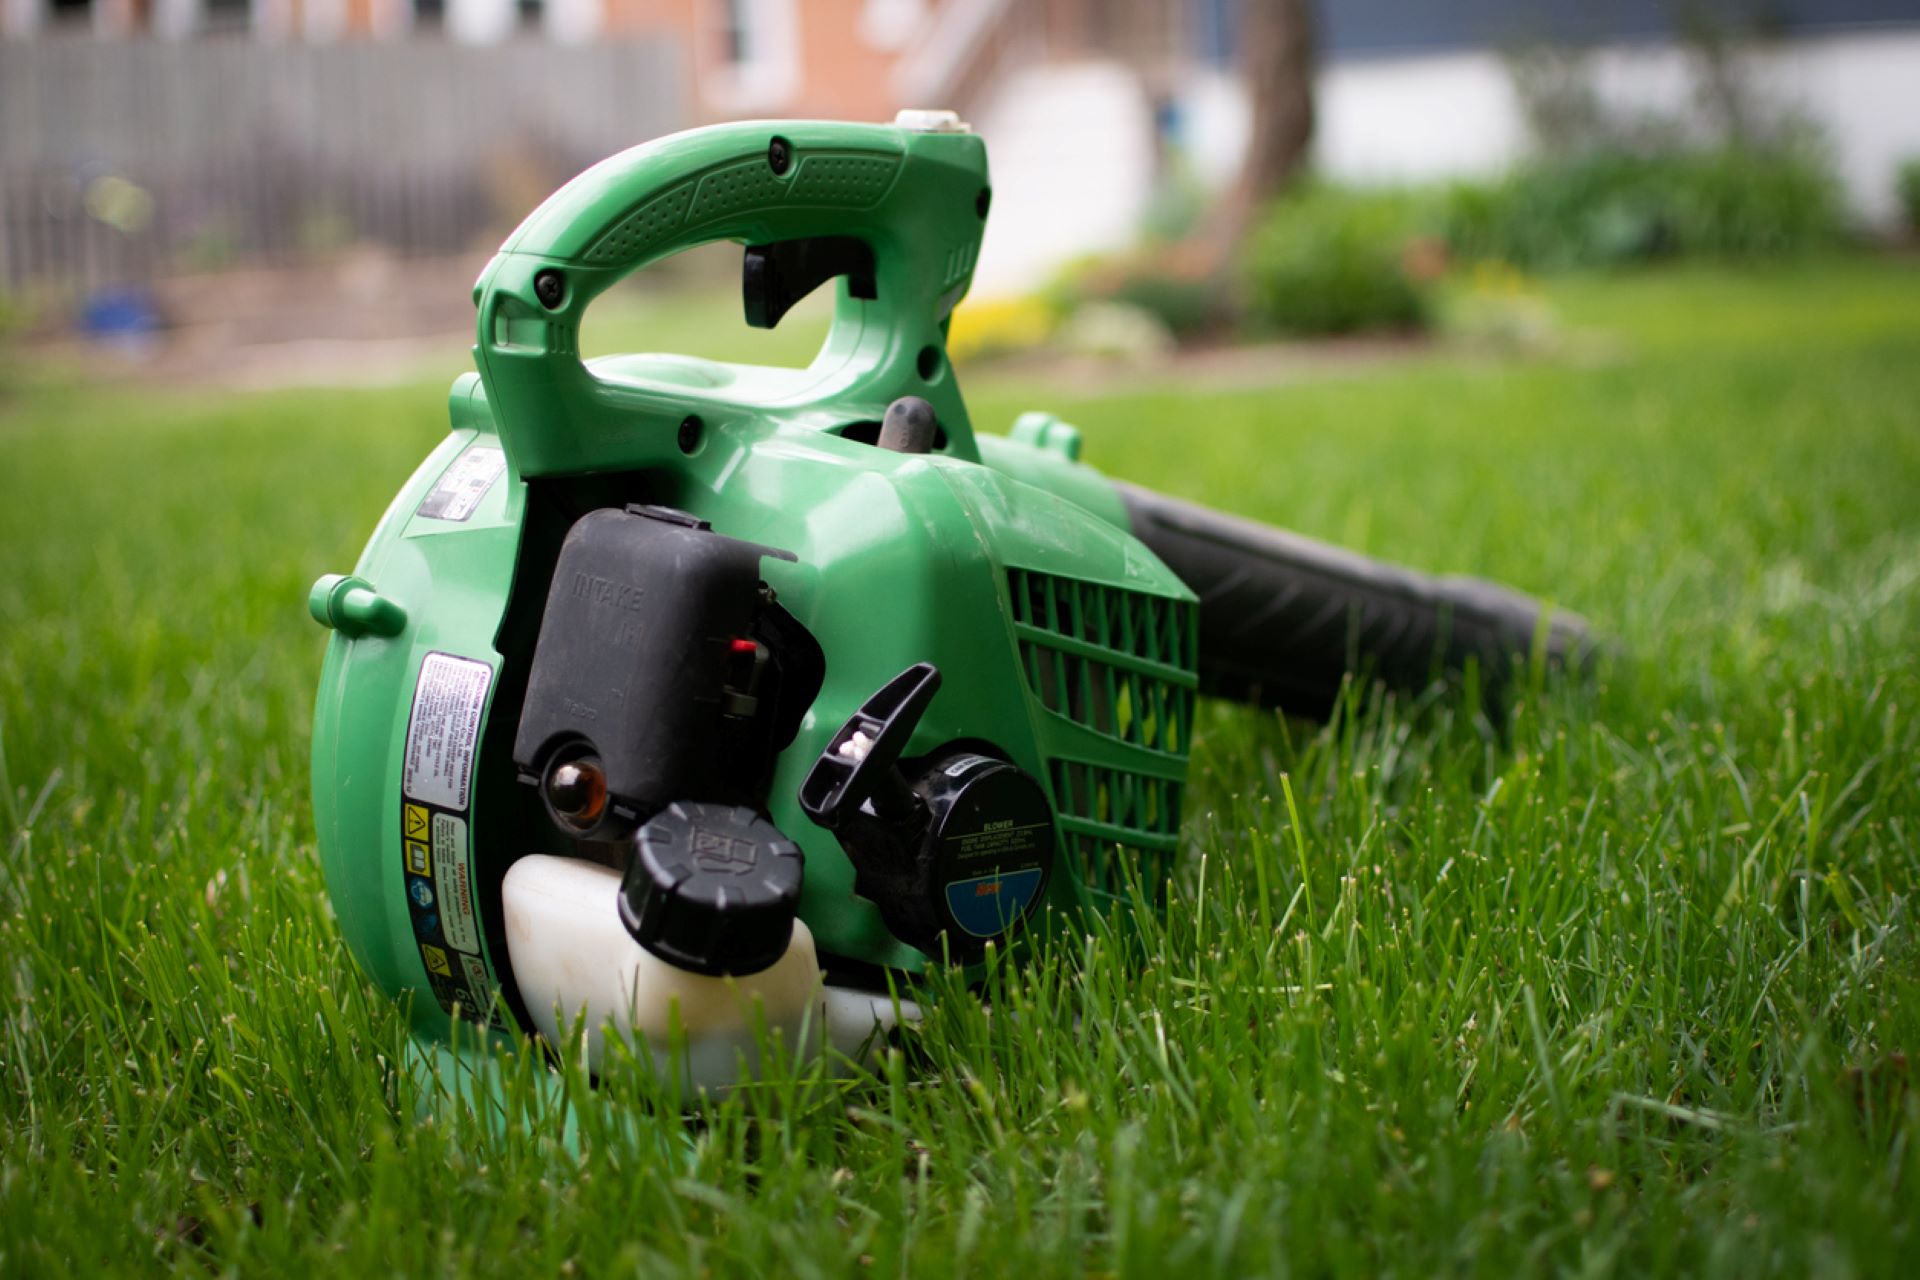 62 reports of yard blowers expelling plastic pieces leads to